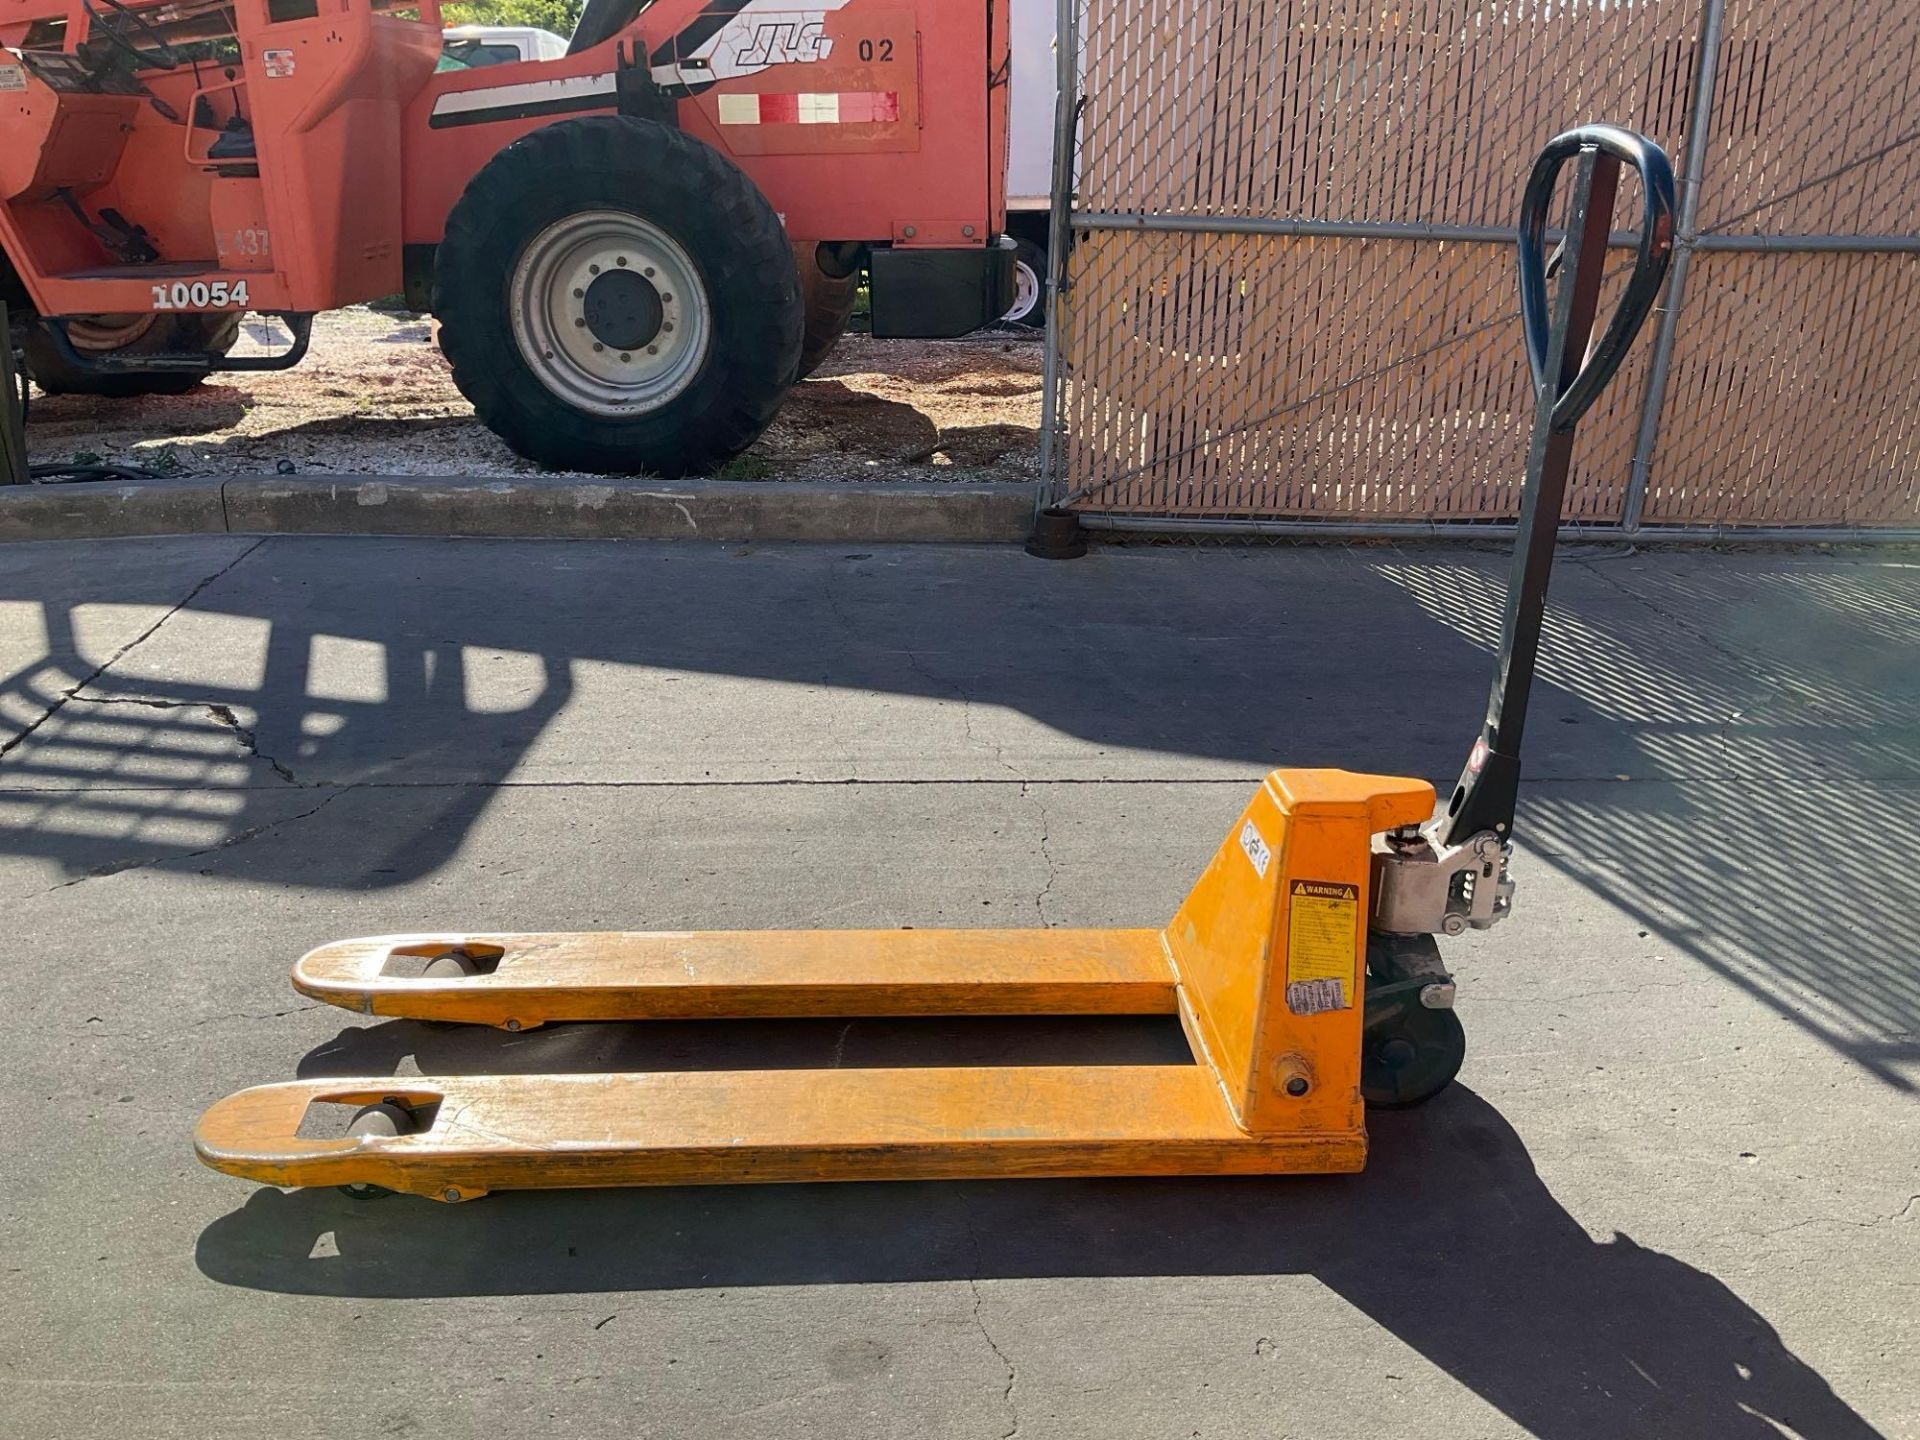 XILIN HYDRAULIC PALLET JACK MODEL XET55, APPROX MAX CAPACITY 5500LBS - Image 6 of 10